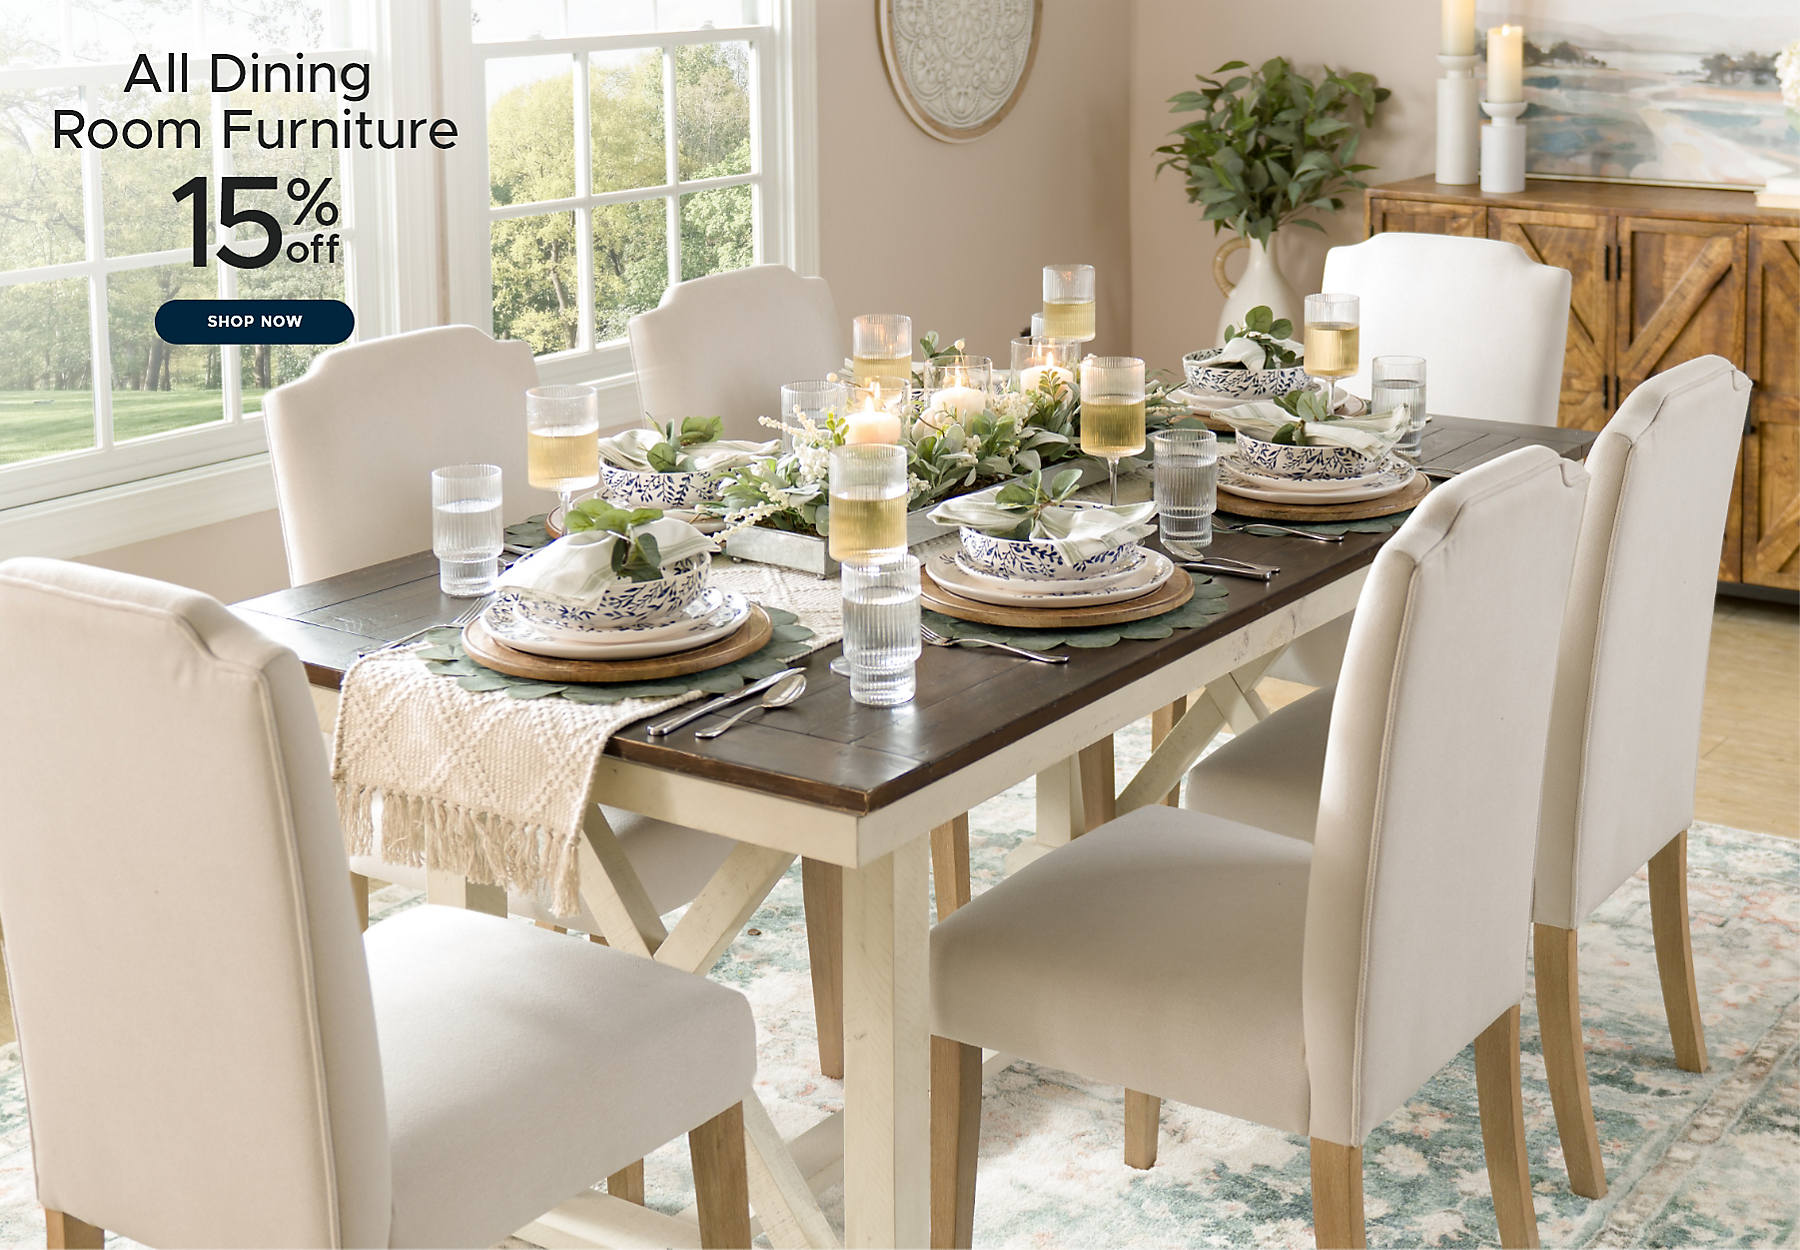 All Dining Room Furniture 15% off shop now